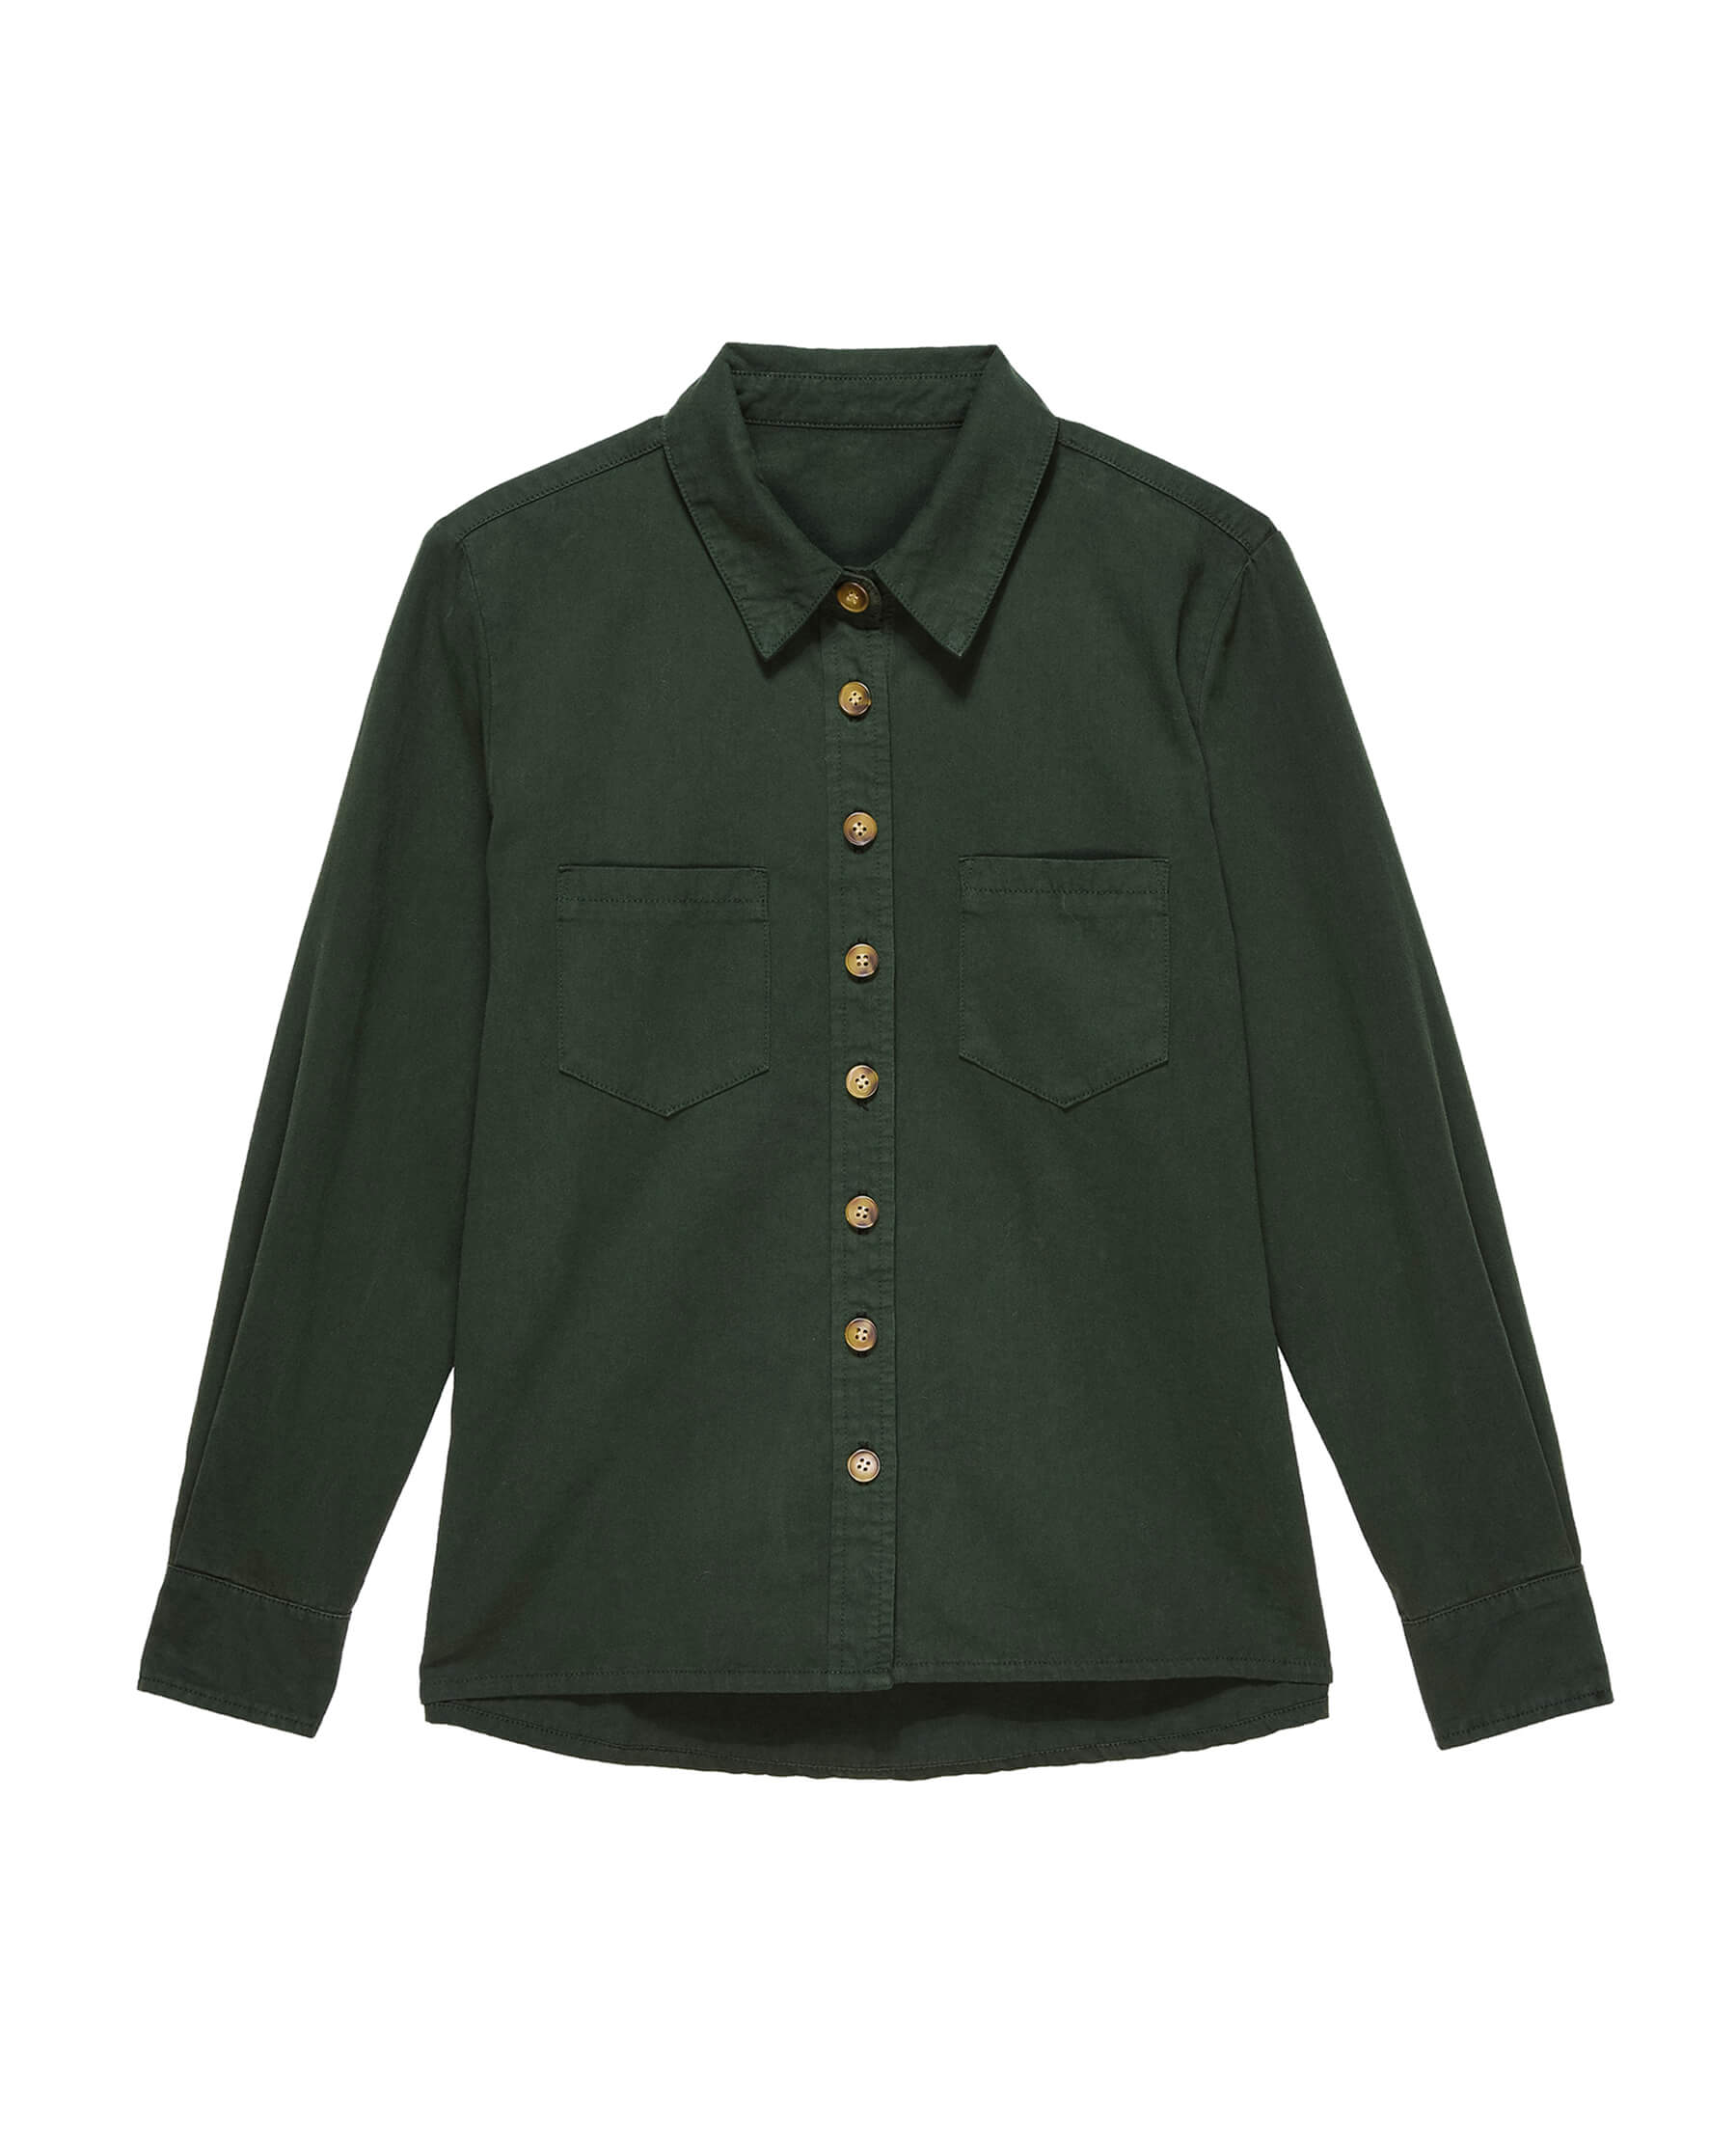 The Scouting Shirt. -- Dark Forest